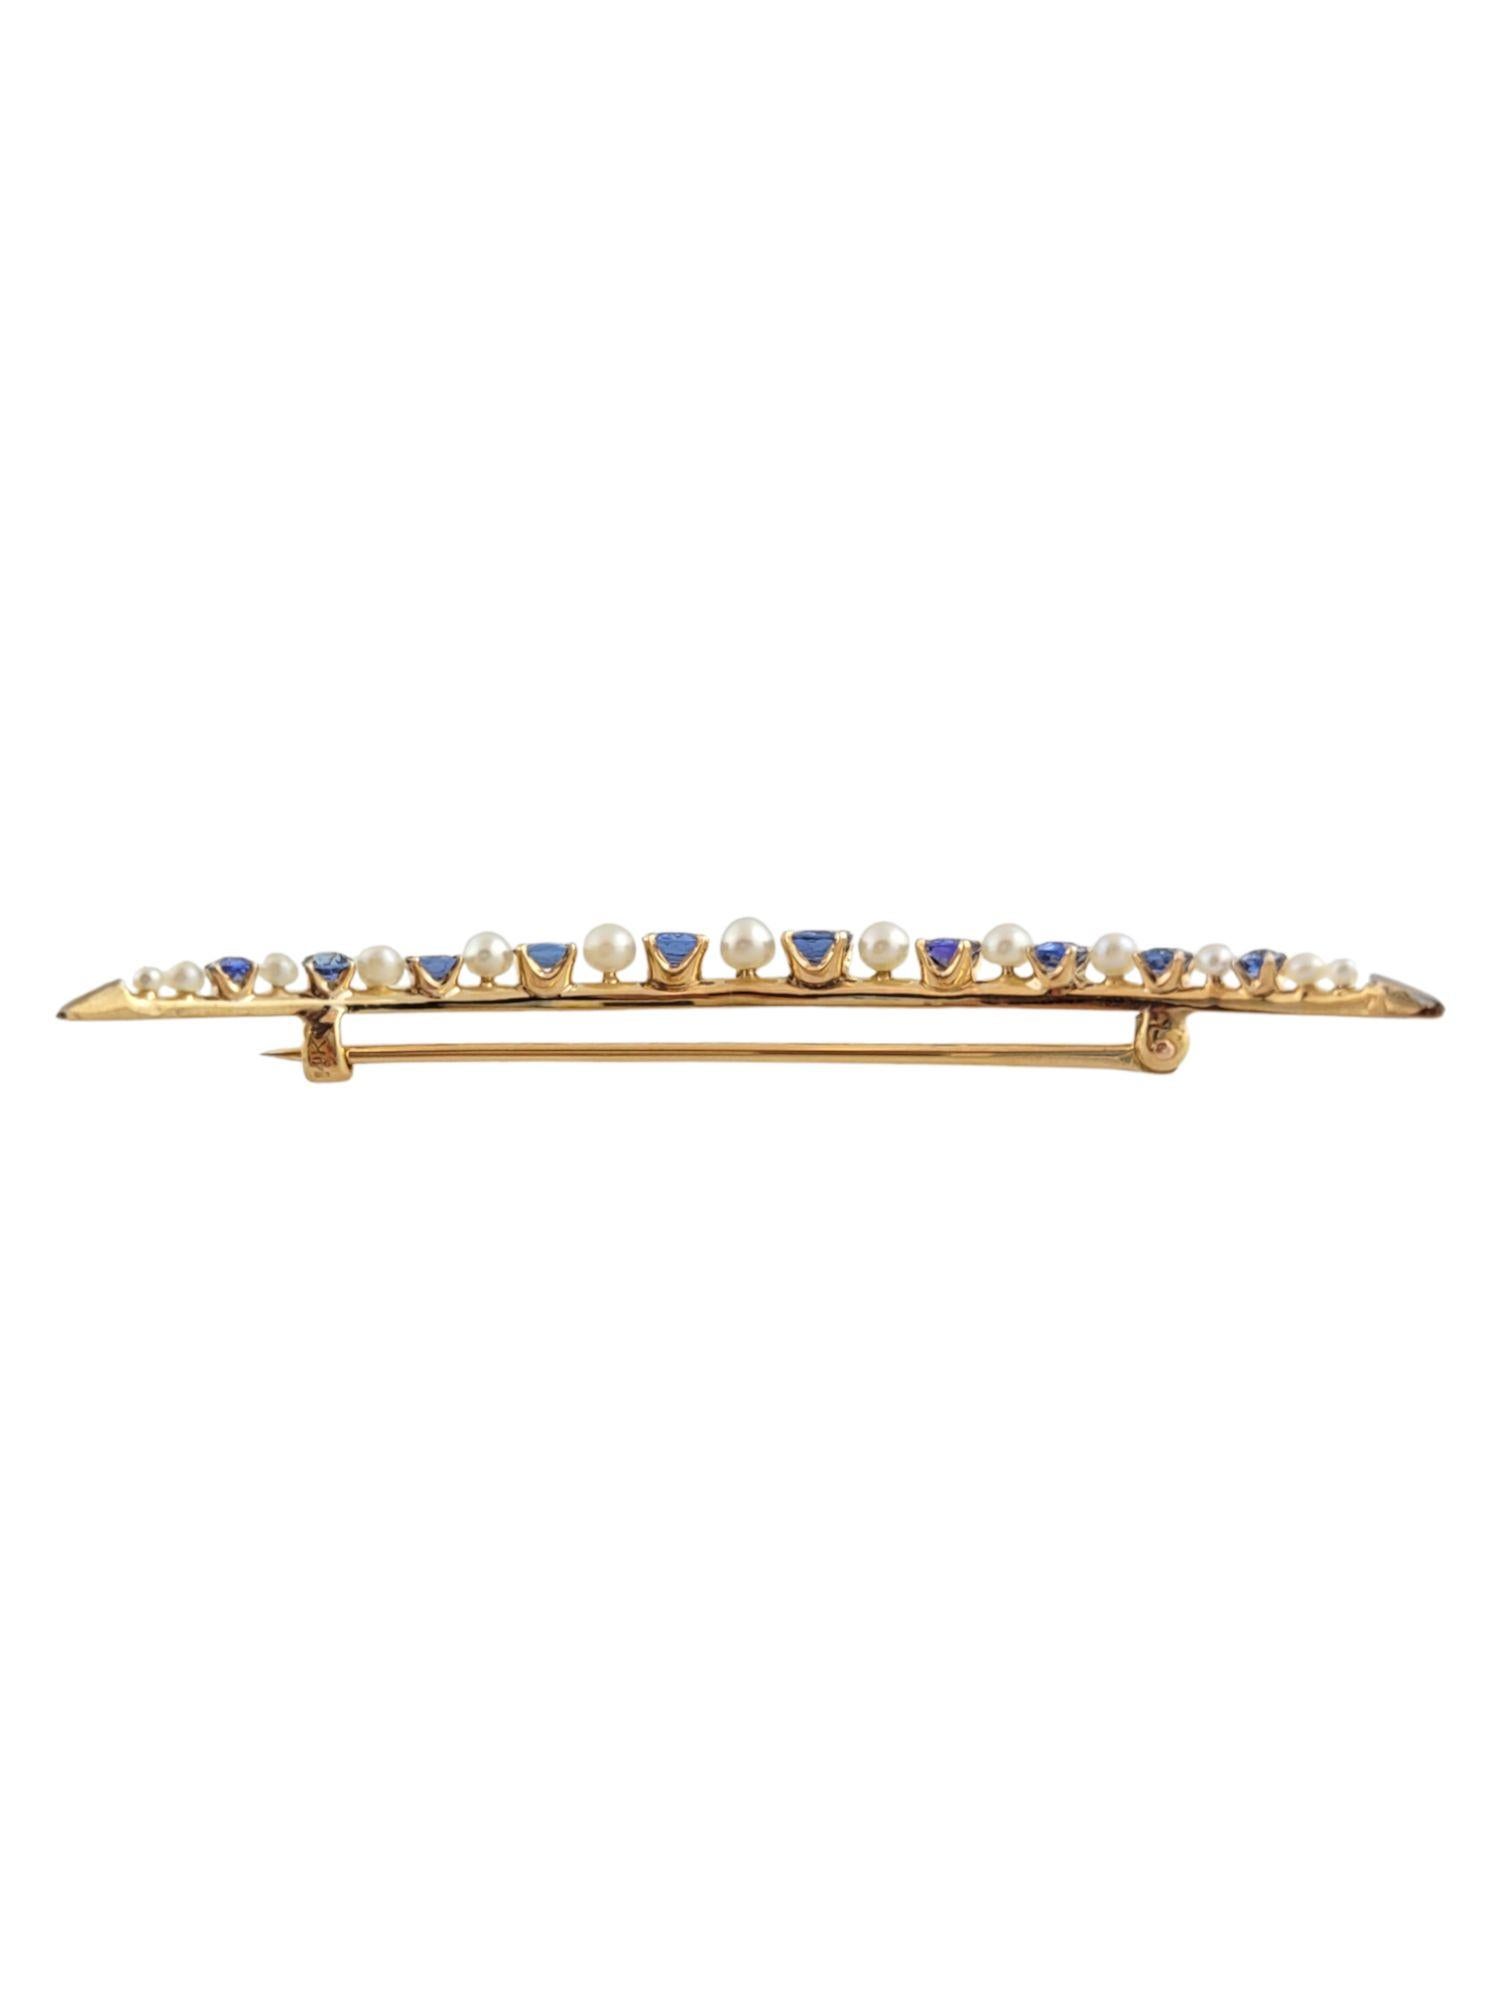 Round Cut 14K Yellow Gold Sapphire and Pearl Crescent Moon Brooch #14776 For Sale